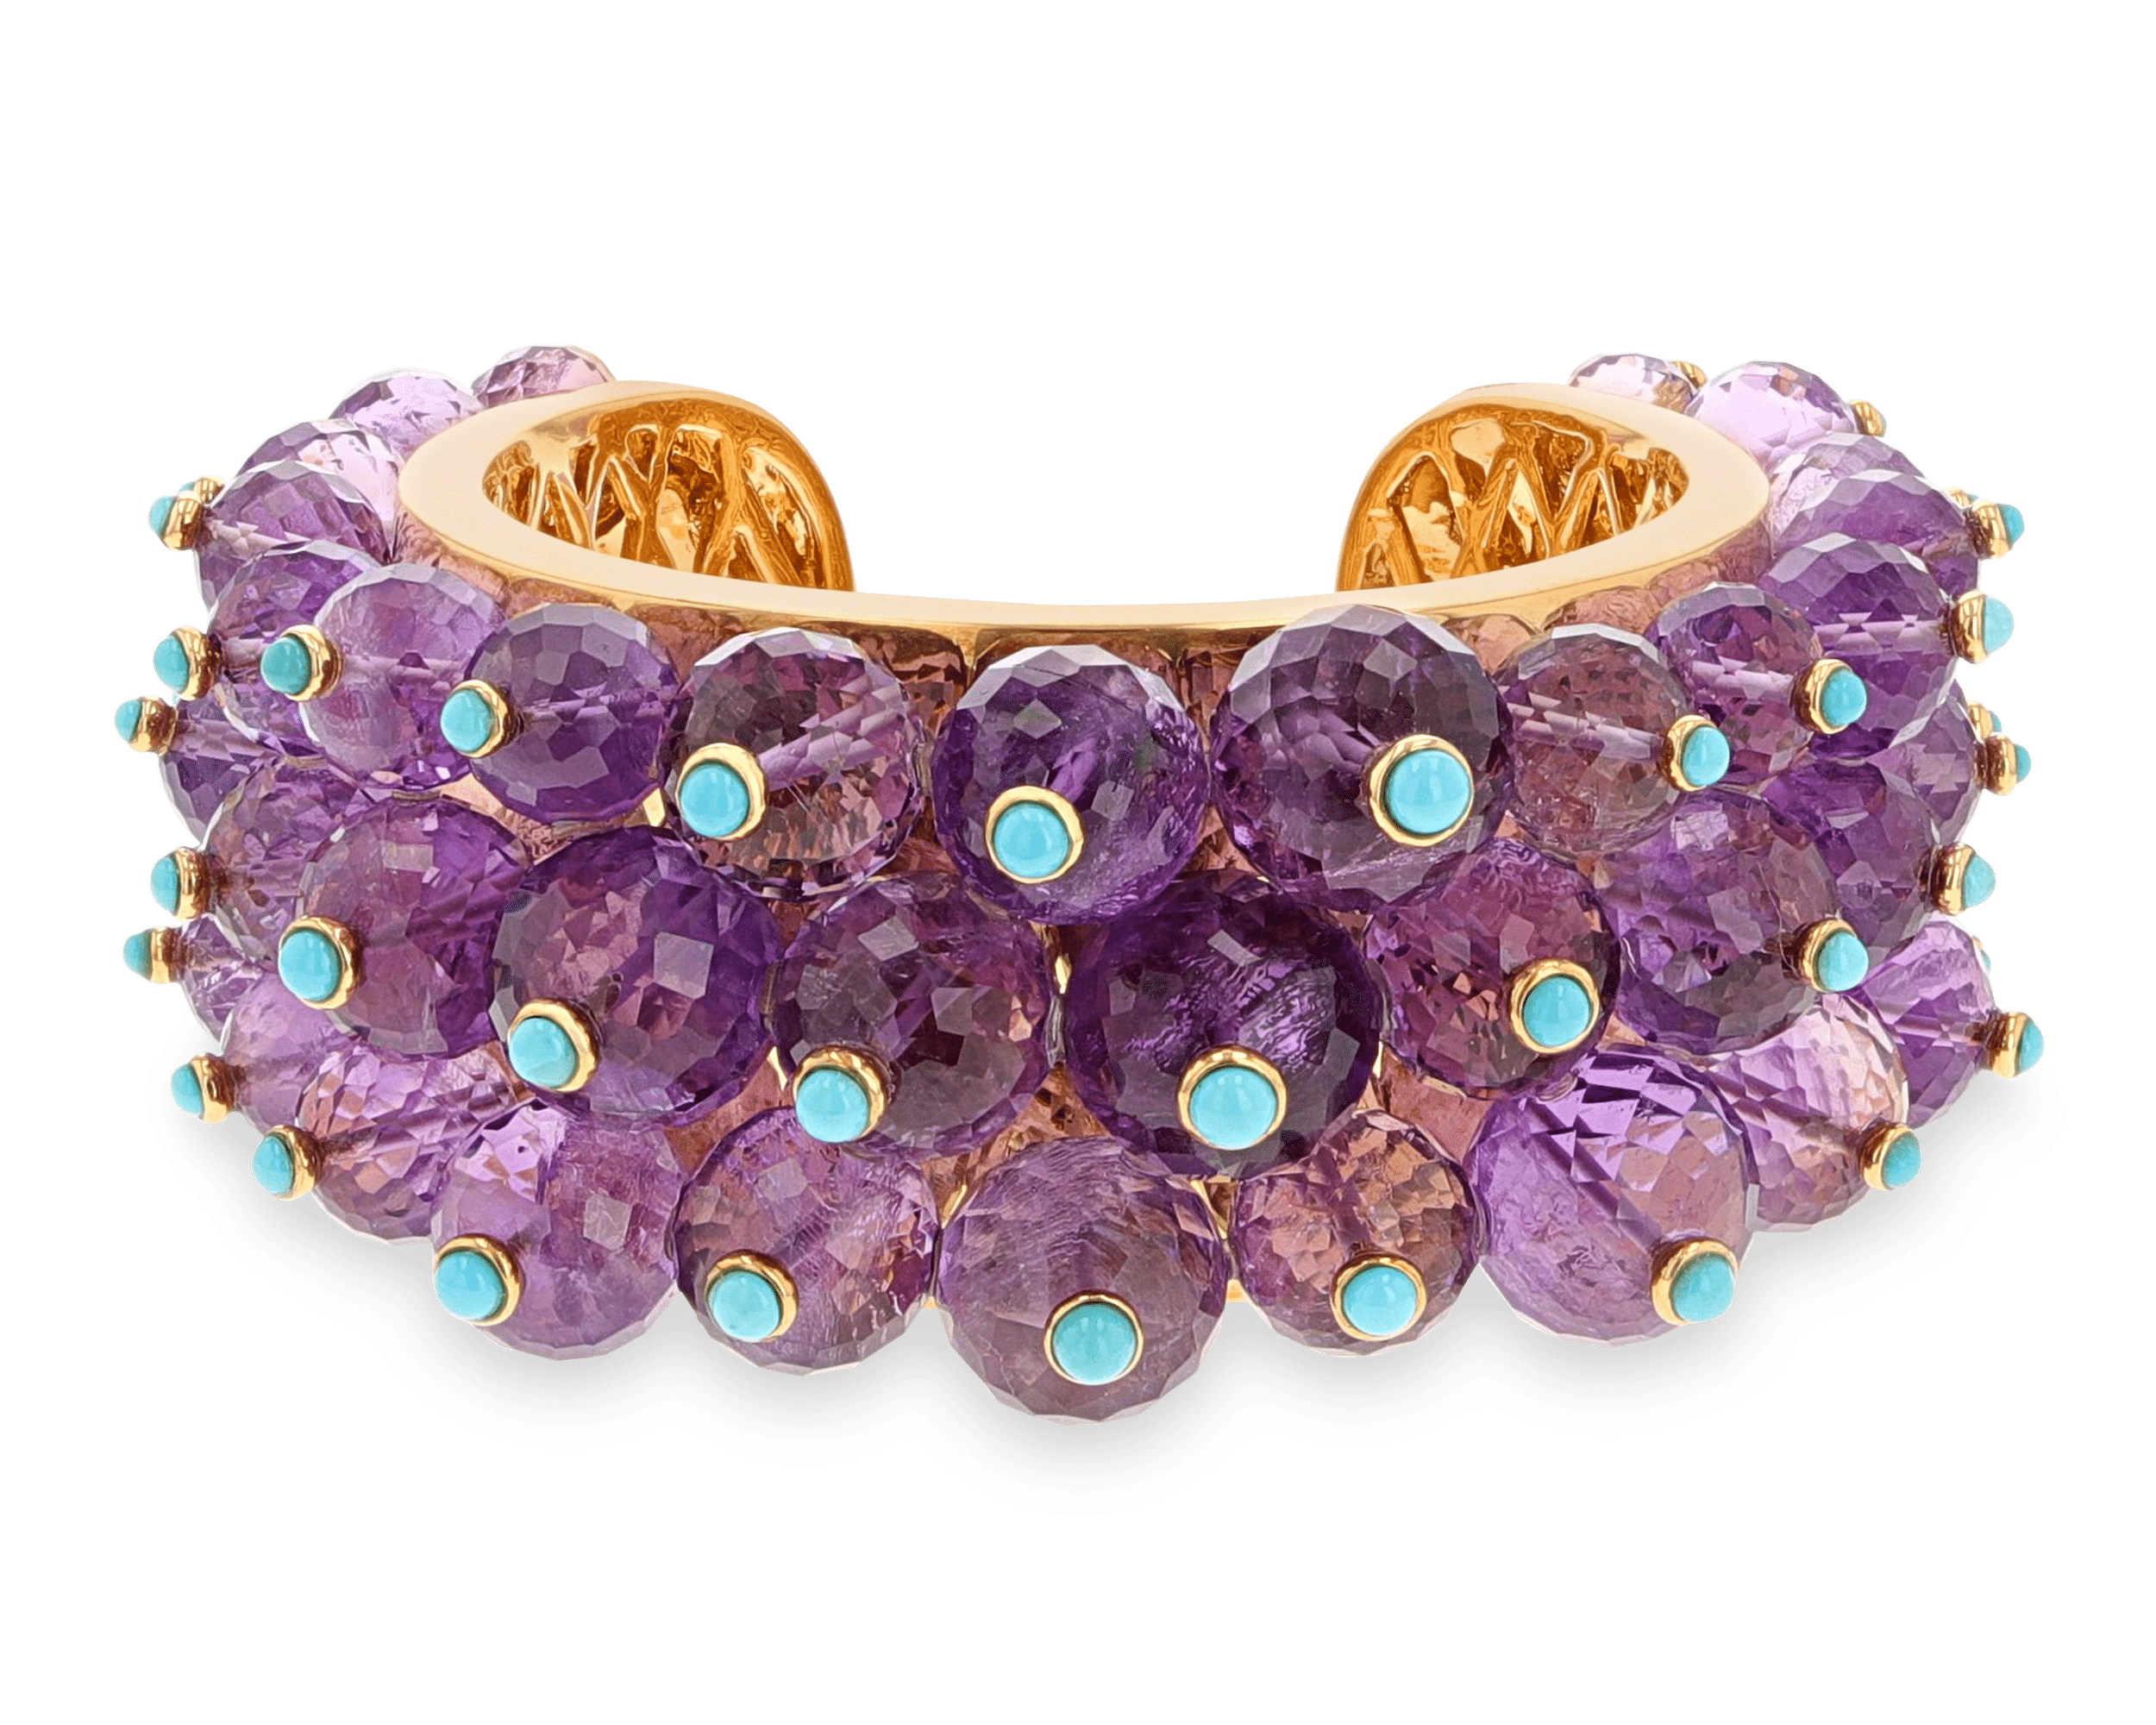 Amethyst and Turquoise Cuff Bracelet